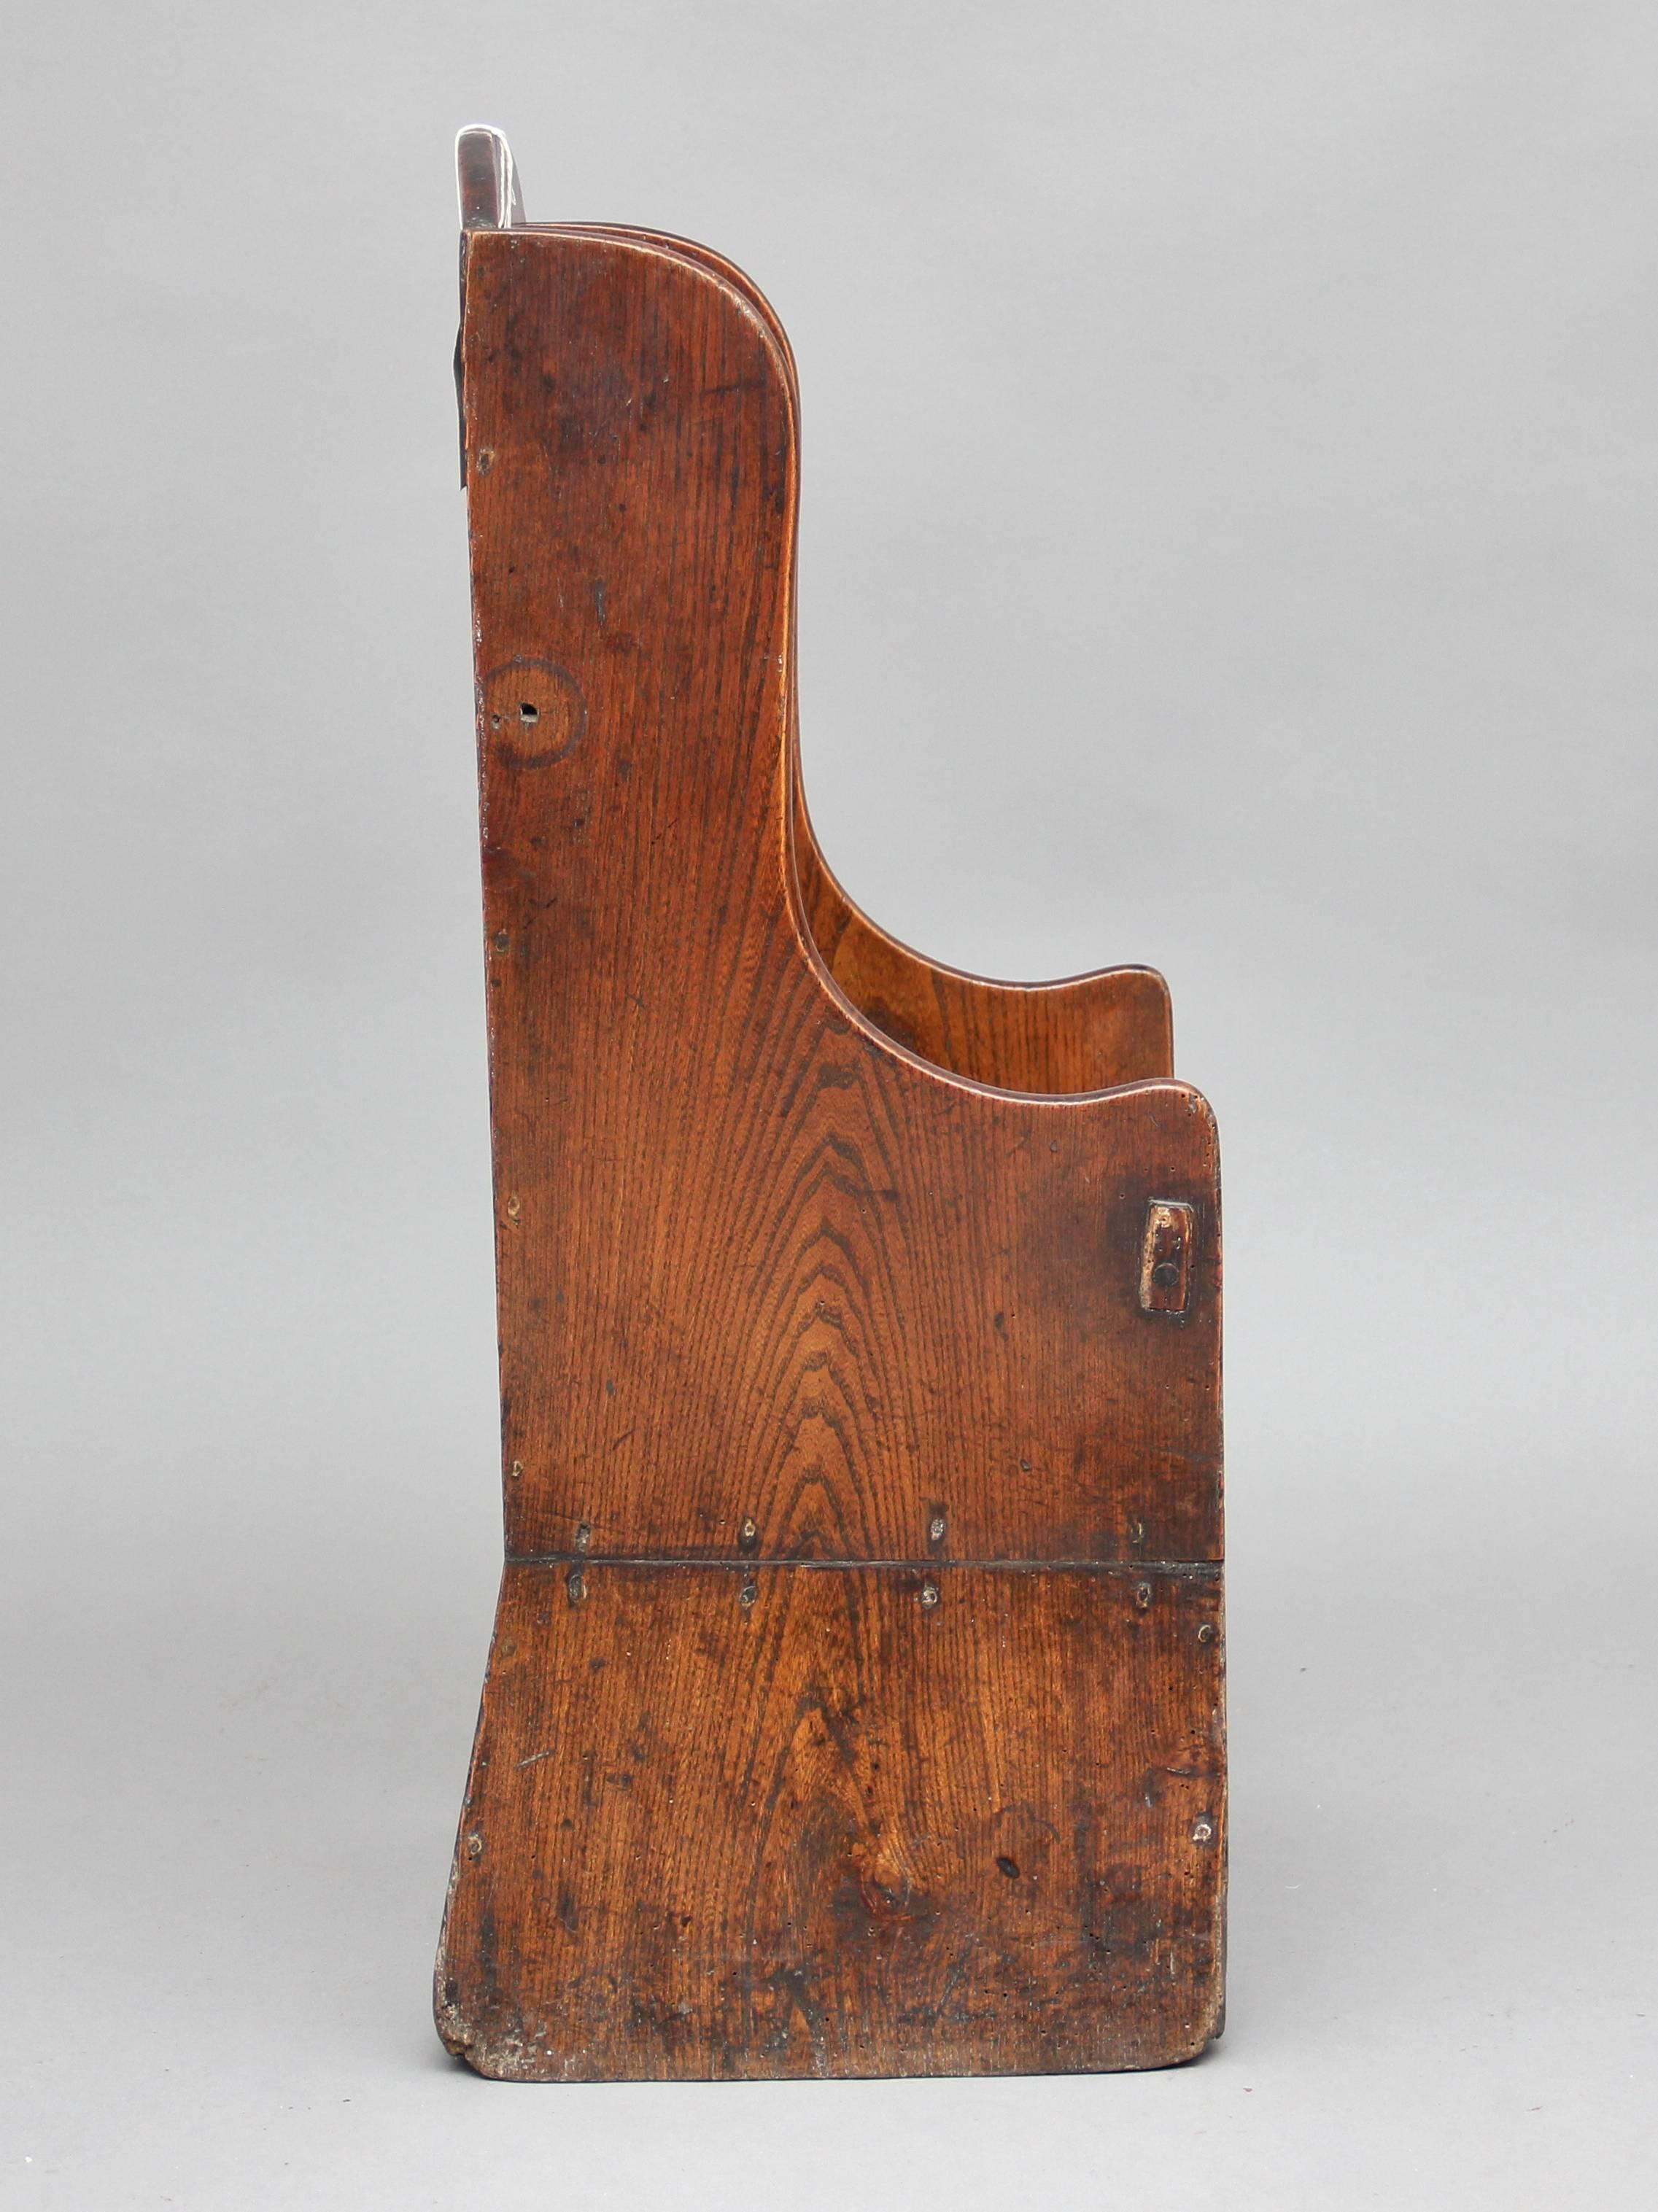 18th century elm upright child’s chair, with shaped sides and an arched back with a pierced hand hold, circa 1780.